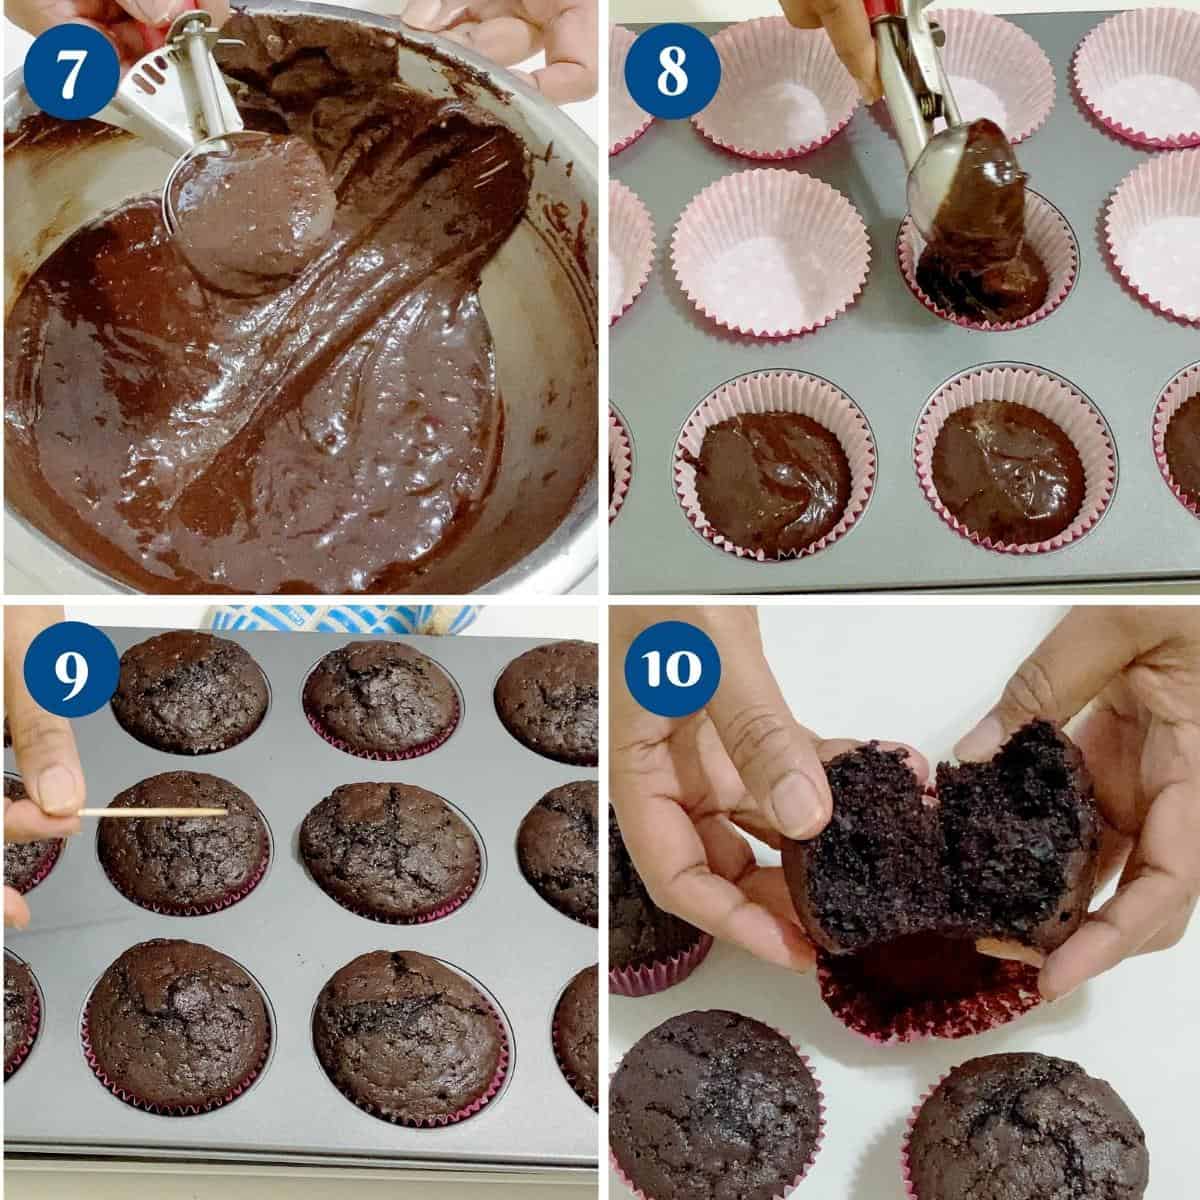 Progress pictures collage baking chocolate cupcakes.